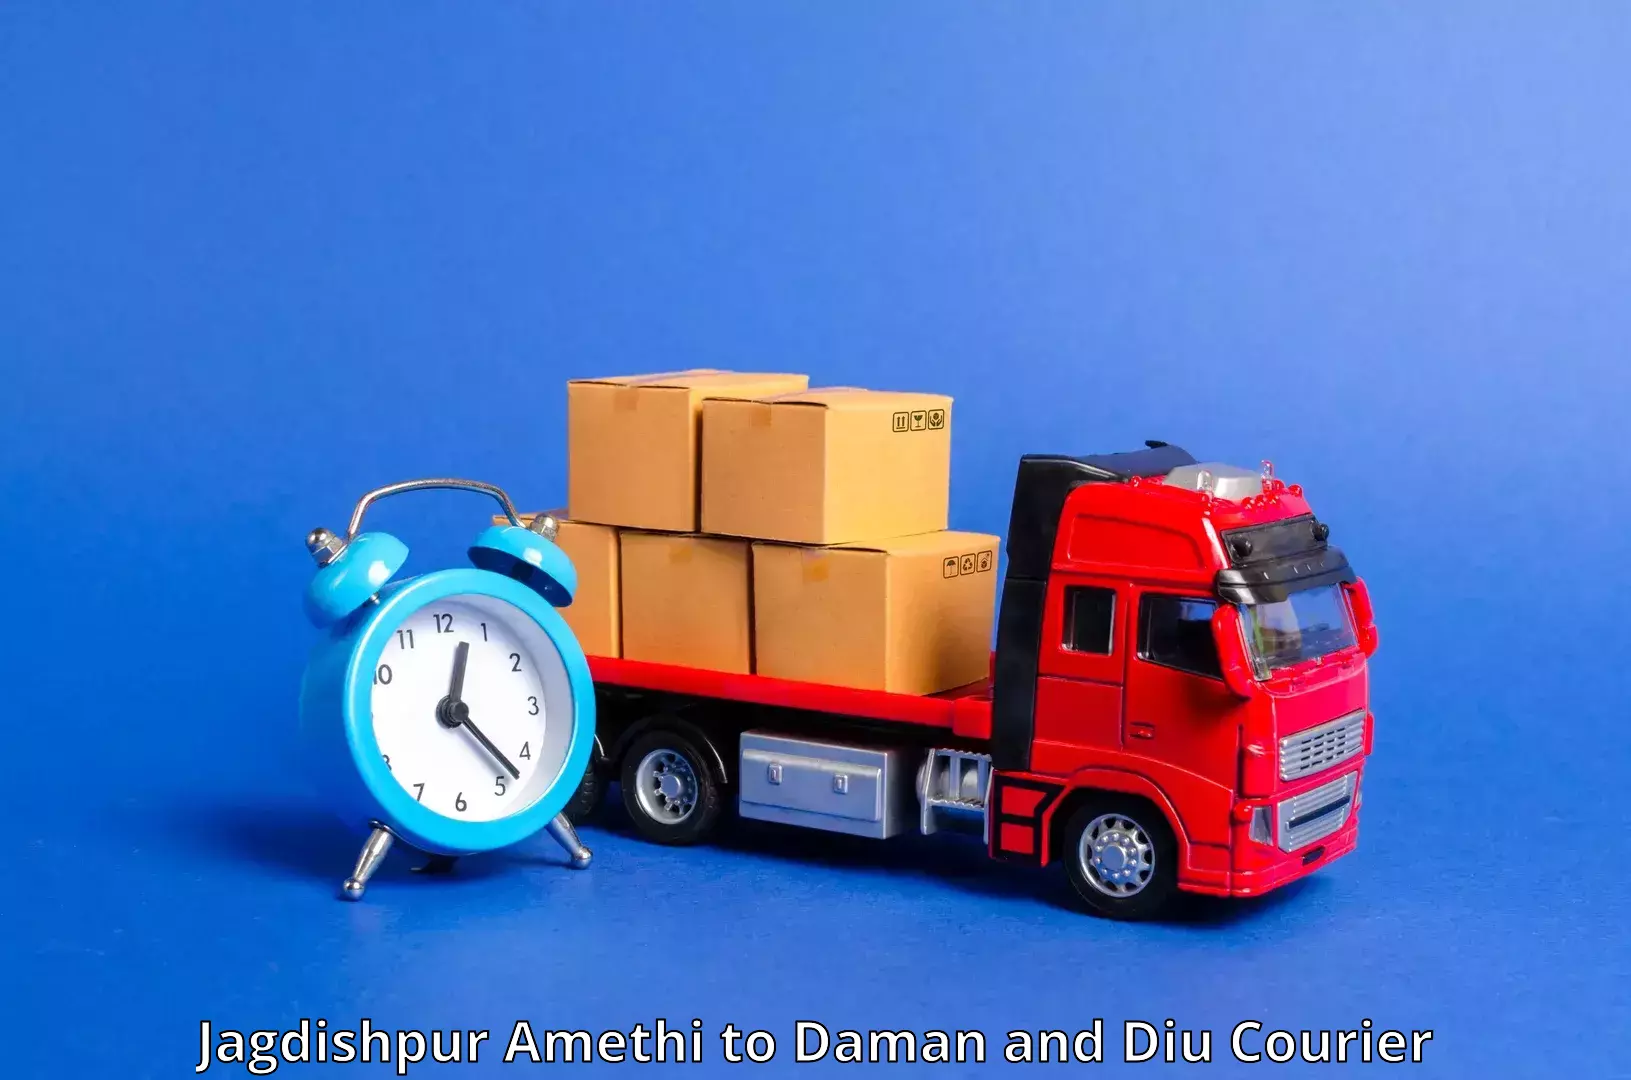 Round-the-clock parcel delivery Jagdishpur Amethi to Daman